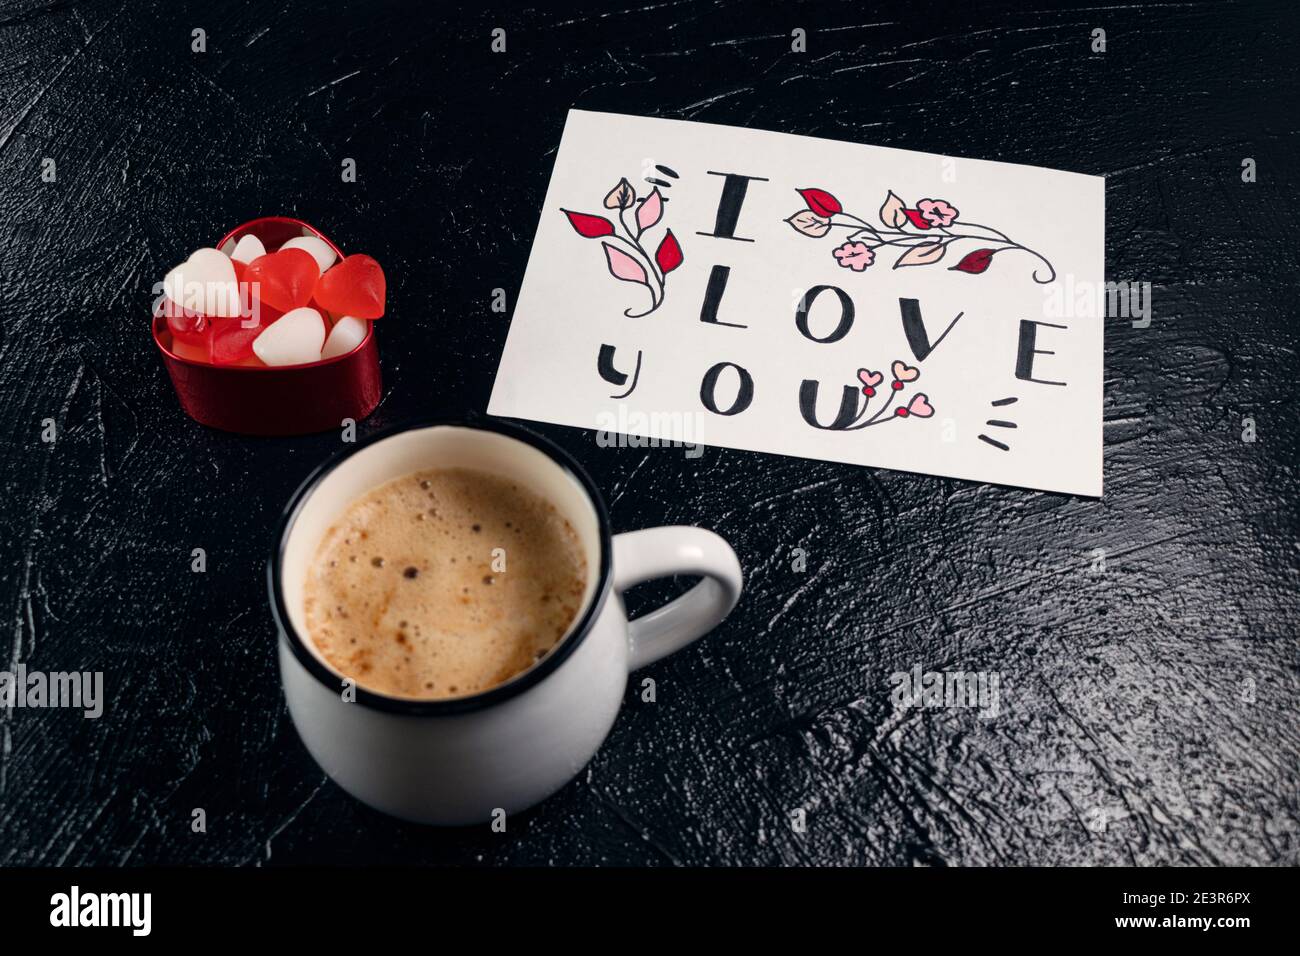 Mug of coffee, red and white heart-shaped marmalade and a valentine card with the word I love you on black background. Valentine's Day breakfast. Valentine's day concept. Soft focus Stock Photo